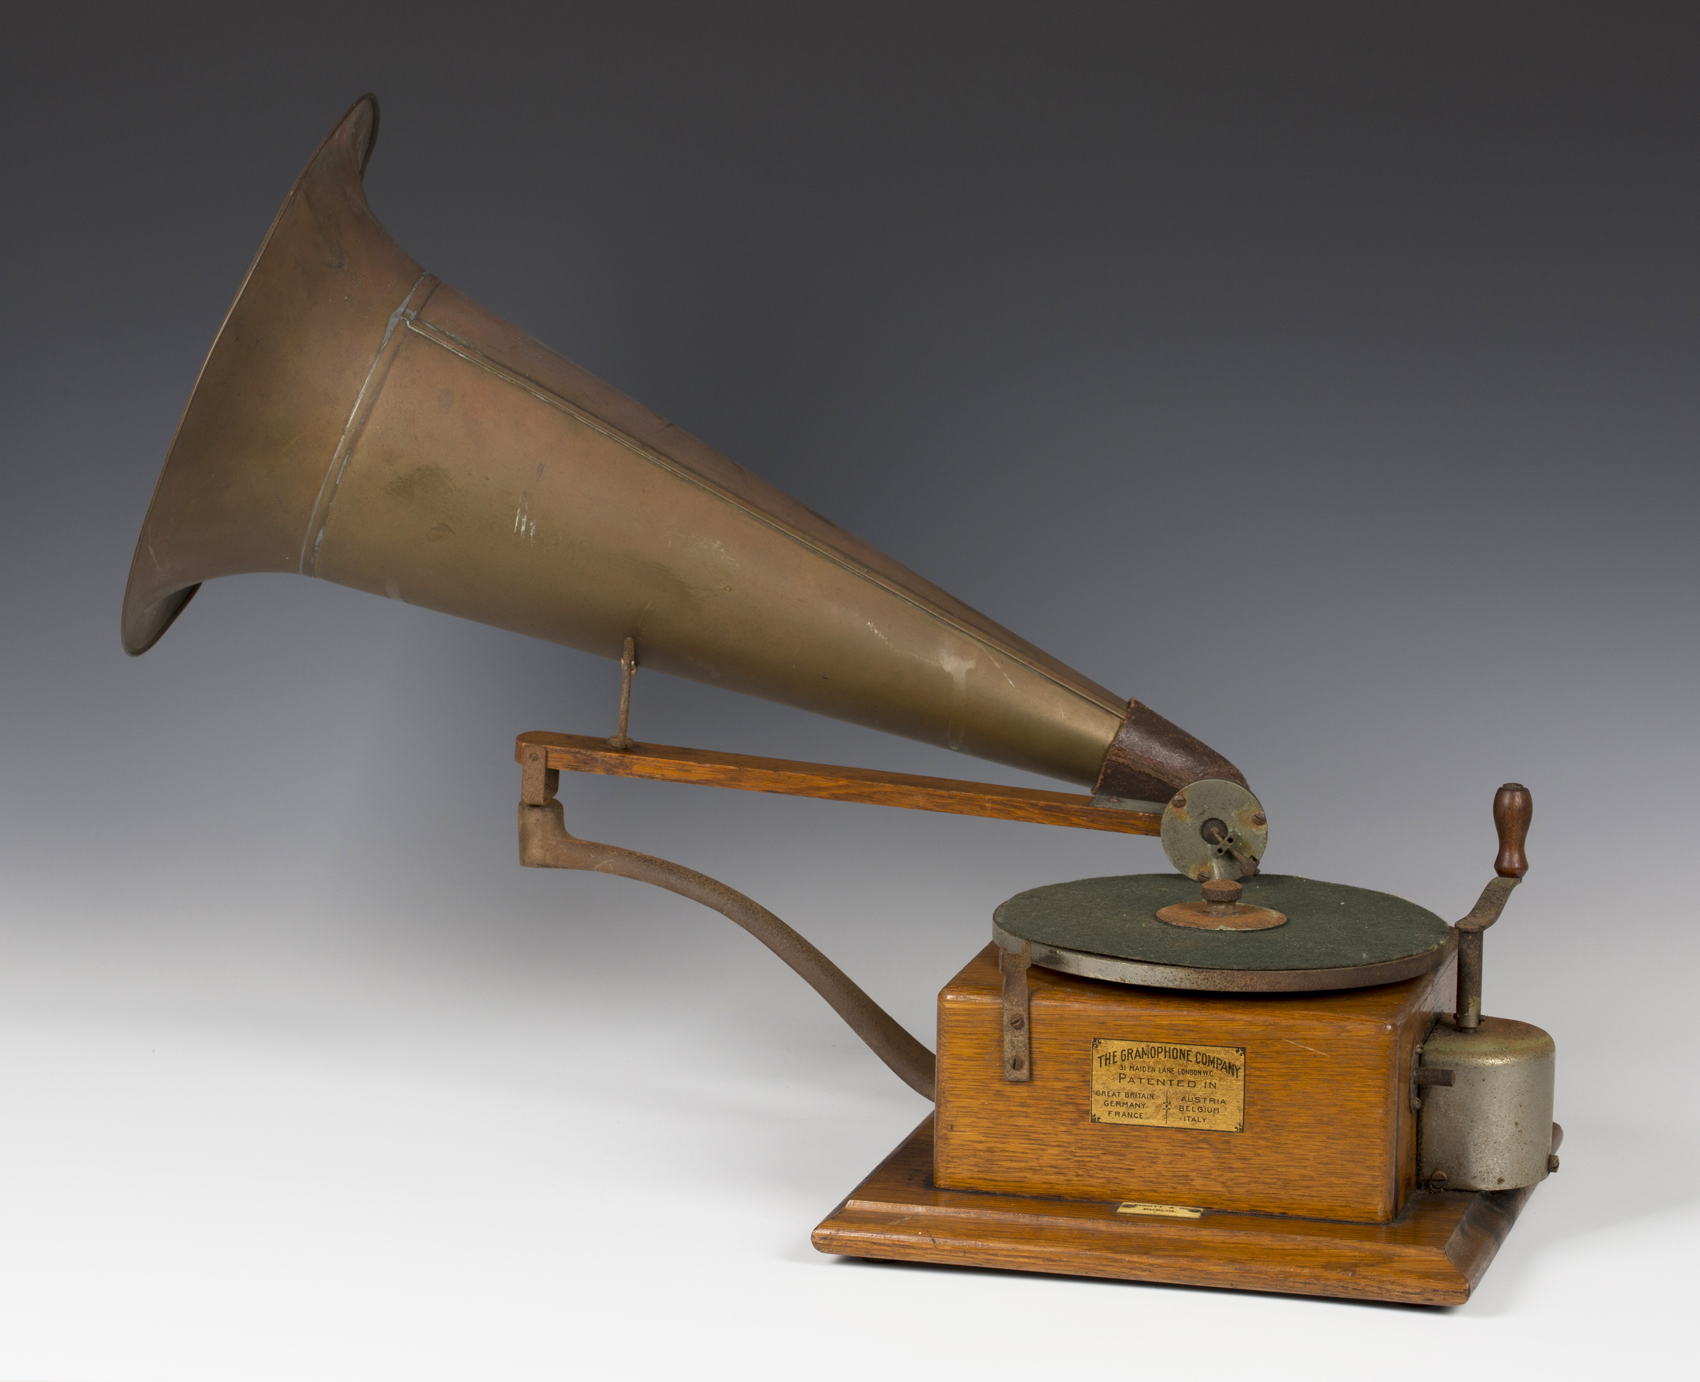 A late 19th century Berliner gramophone by 'The Gramophone Company', with clockwork motor and